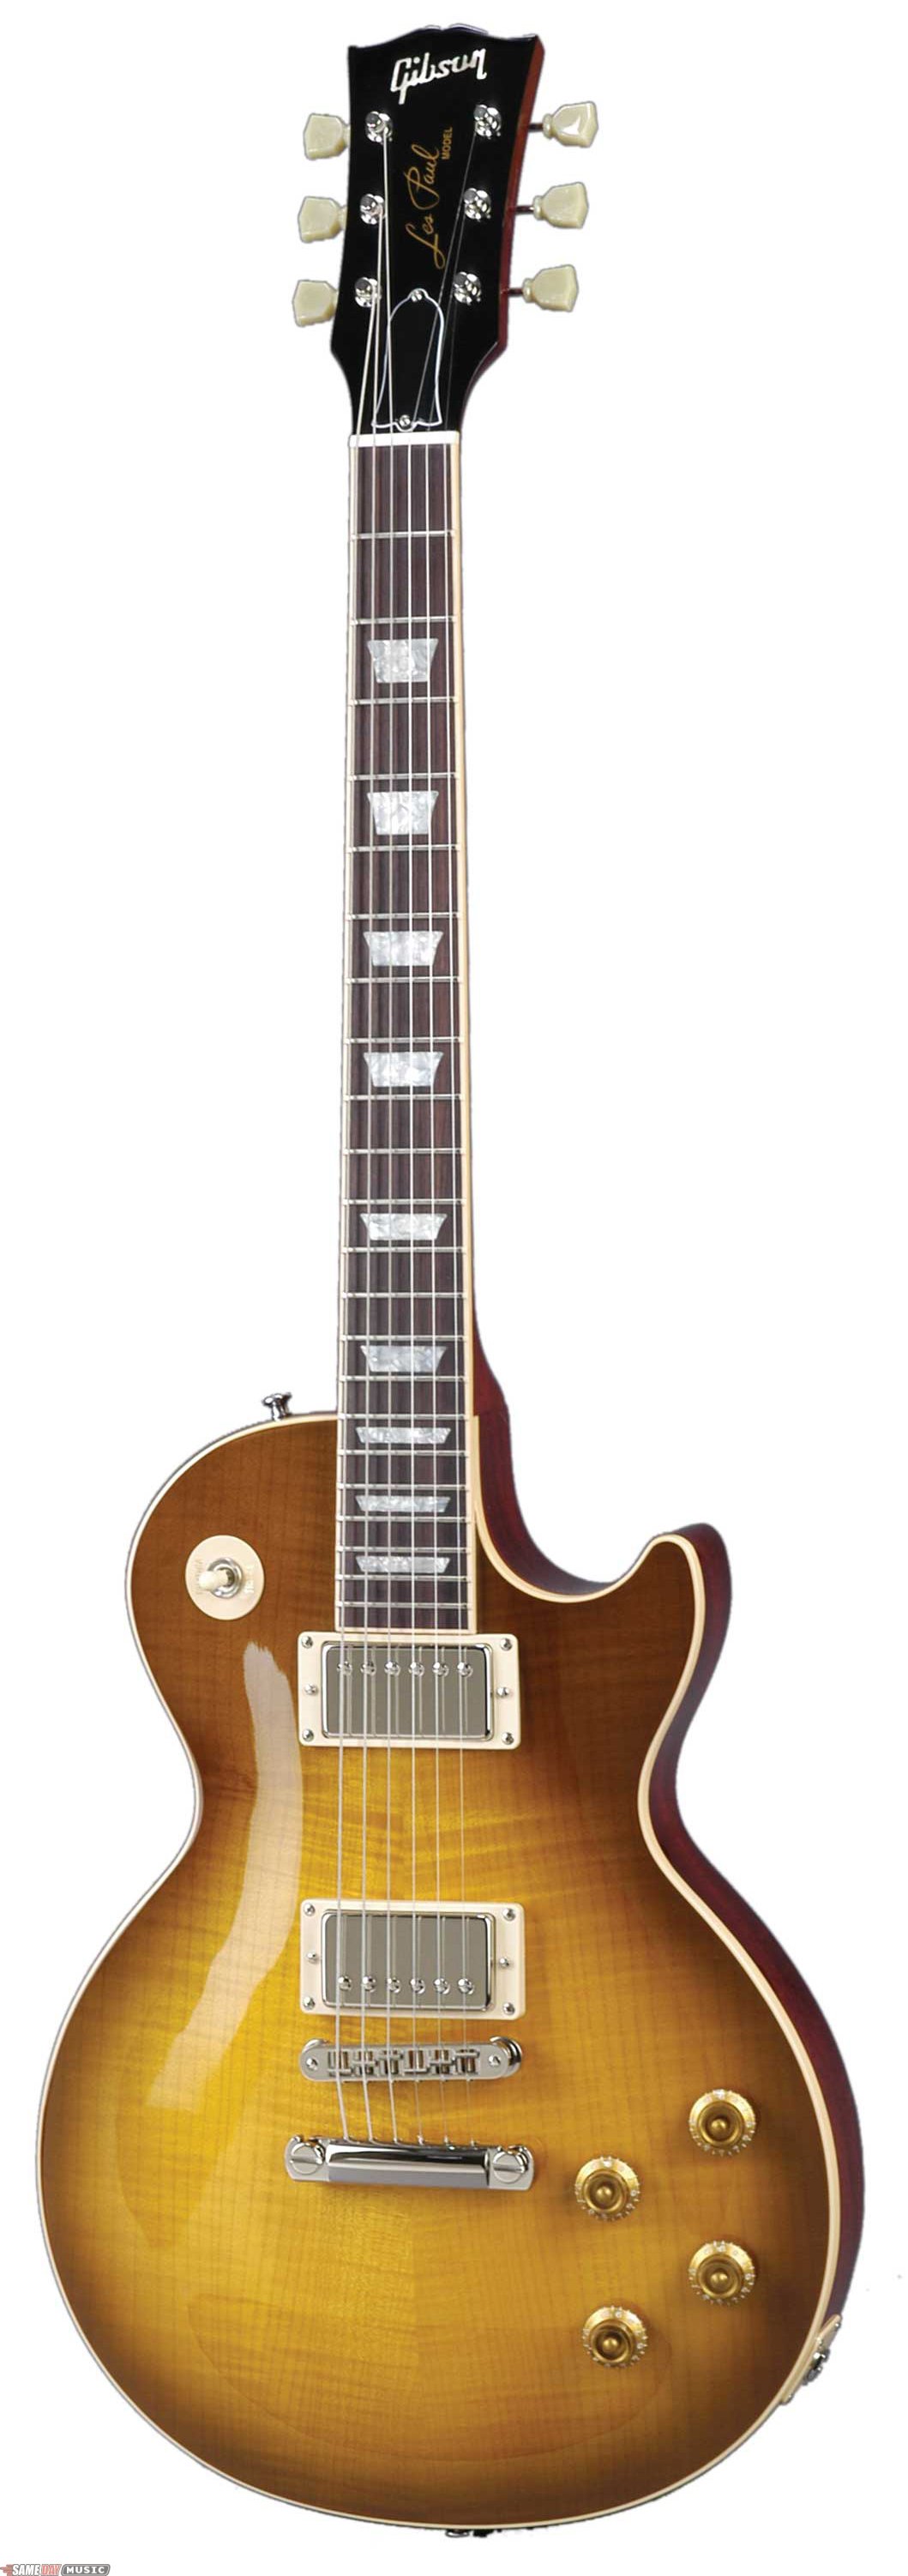 Gibson Guitar 20258 Hd Wallpapers in Music   Imagescicom